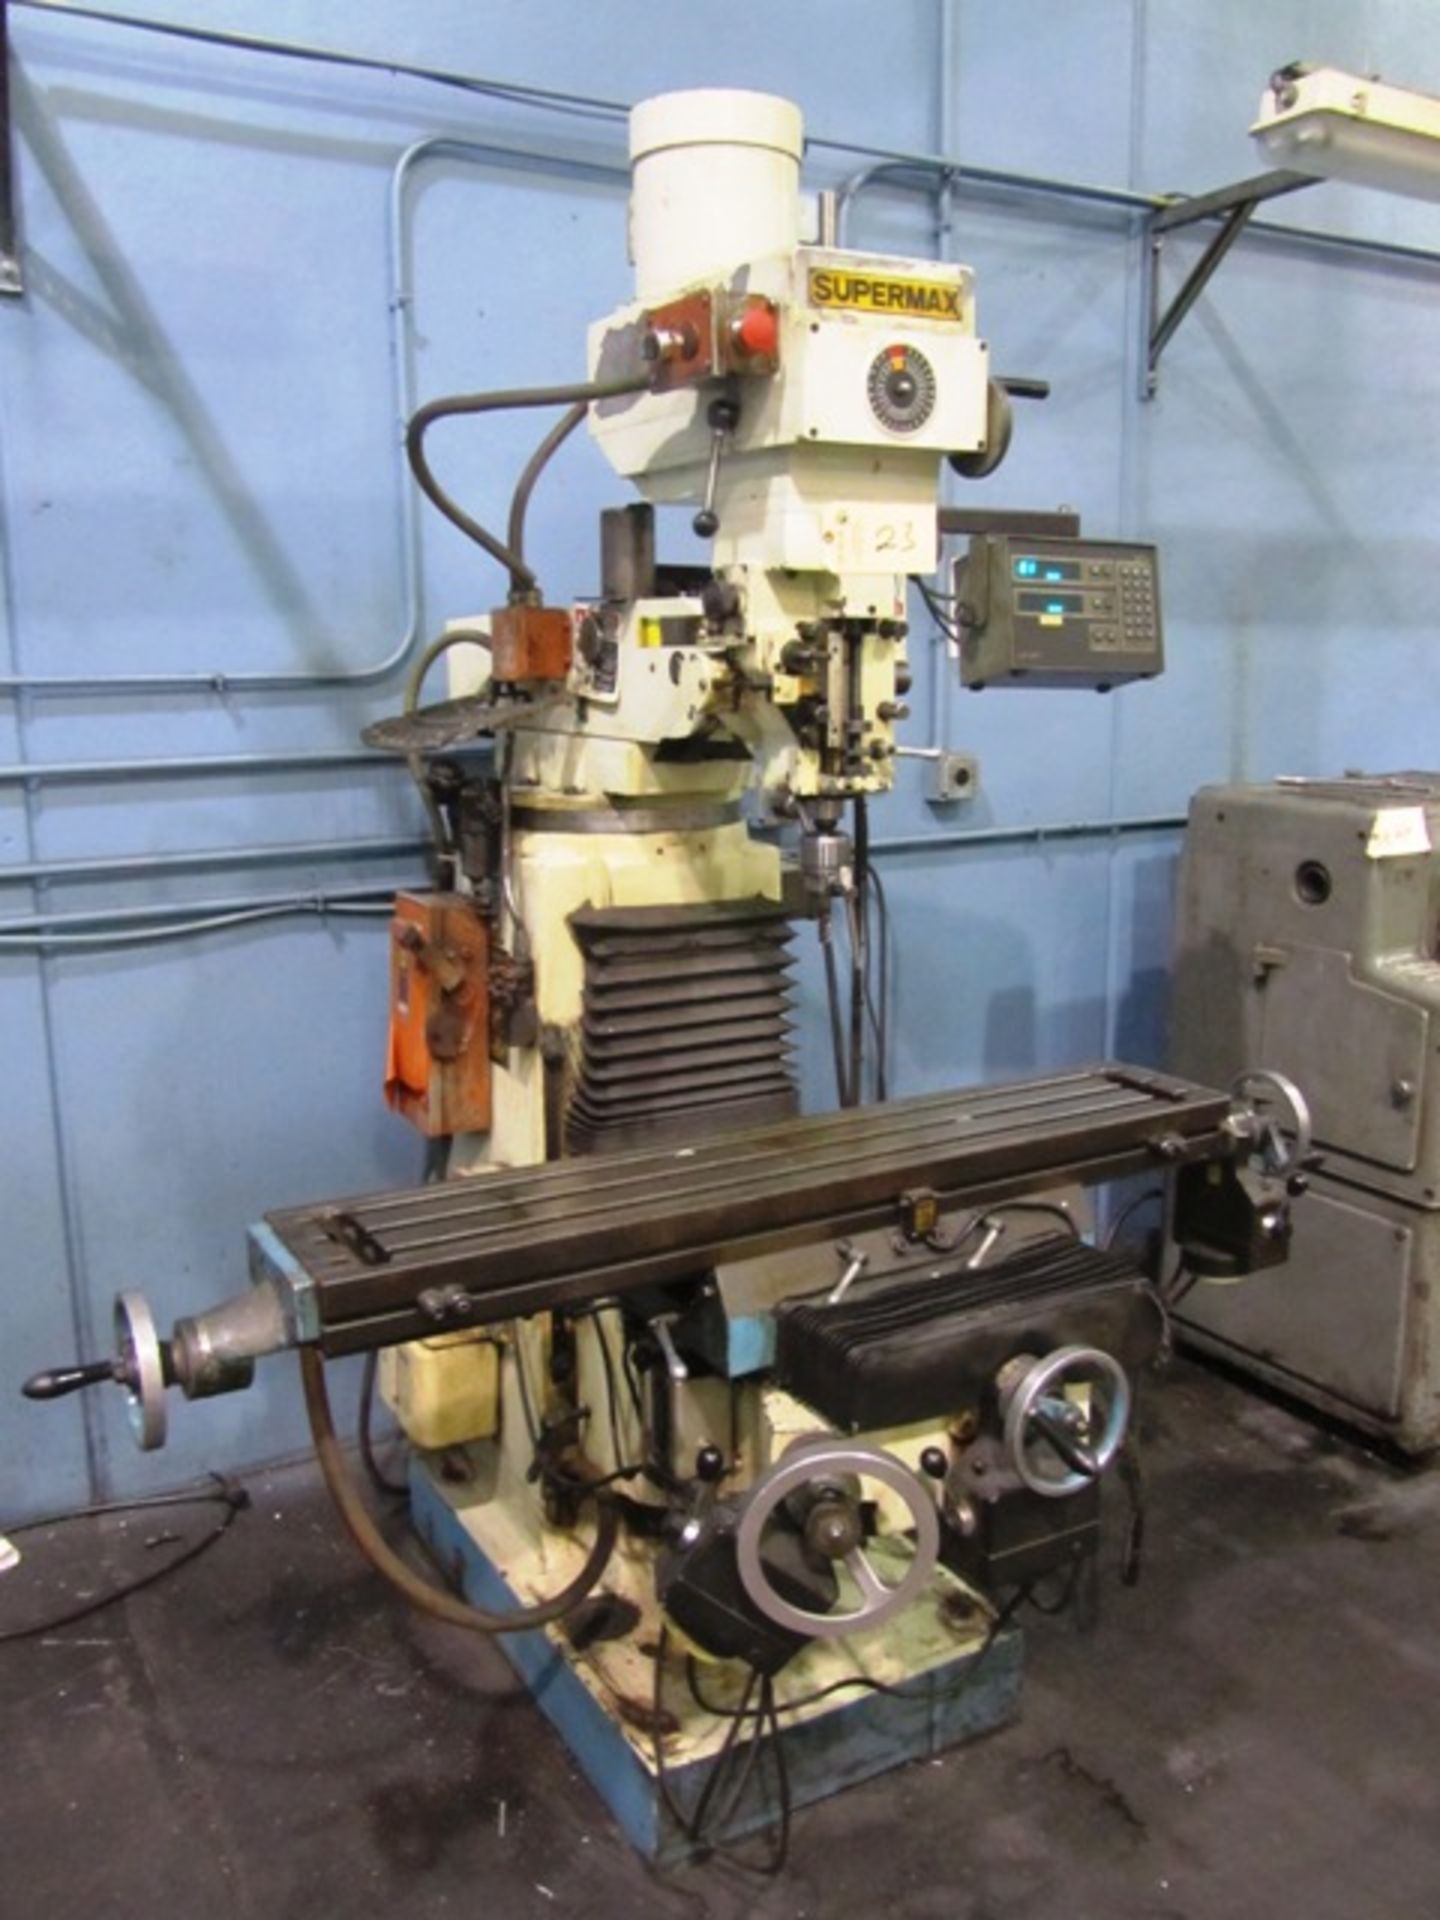 Supermax Vertical Milling Machine - Image 2 of 2